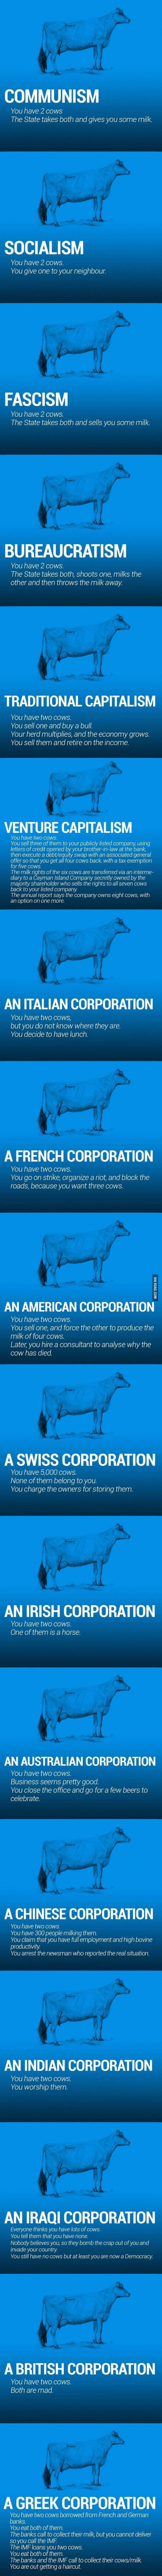 The World Economy Explained With Two Cows